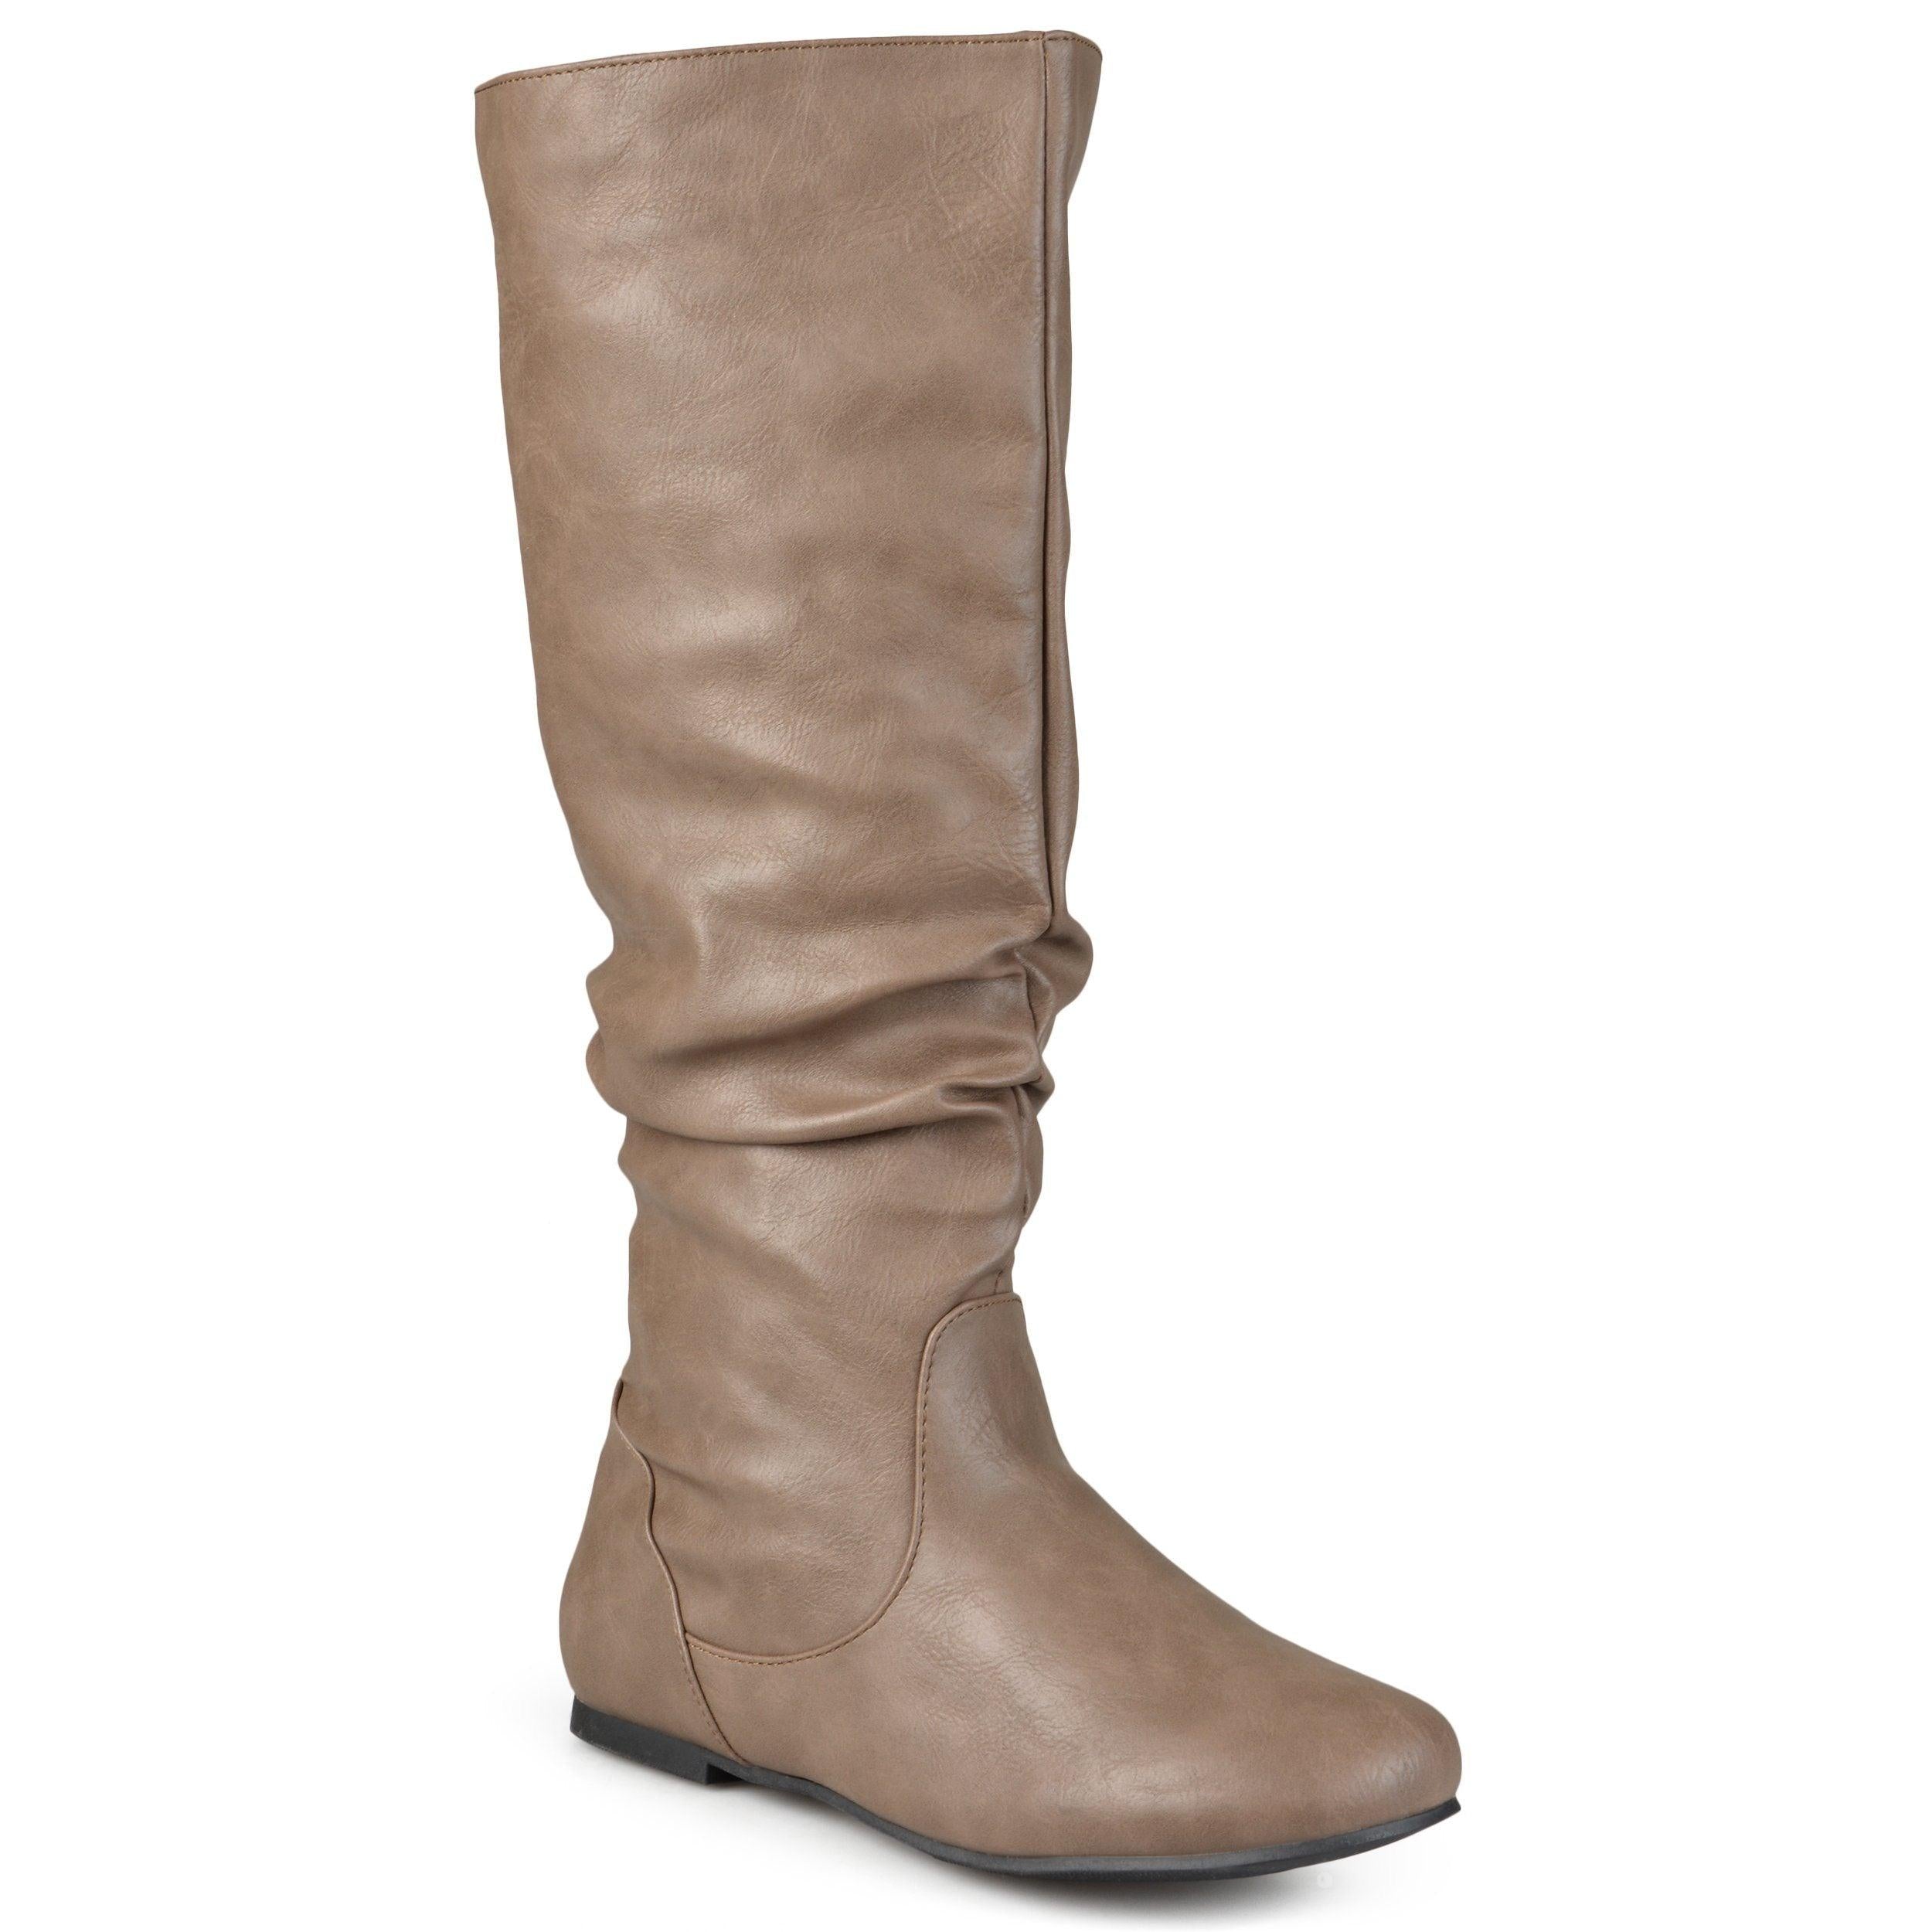 Stormy Extra Wide Calf Boot, Women's Slouchy Boots